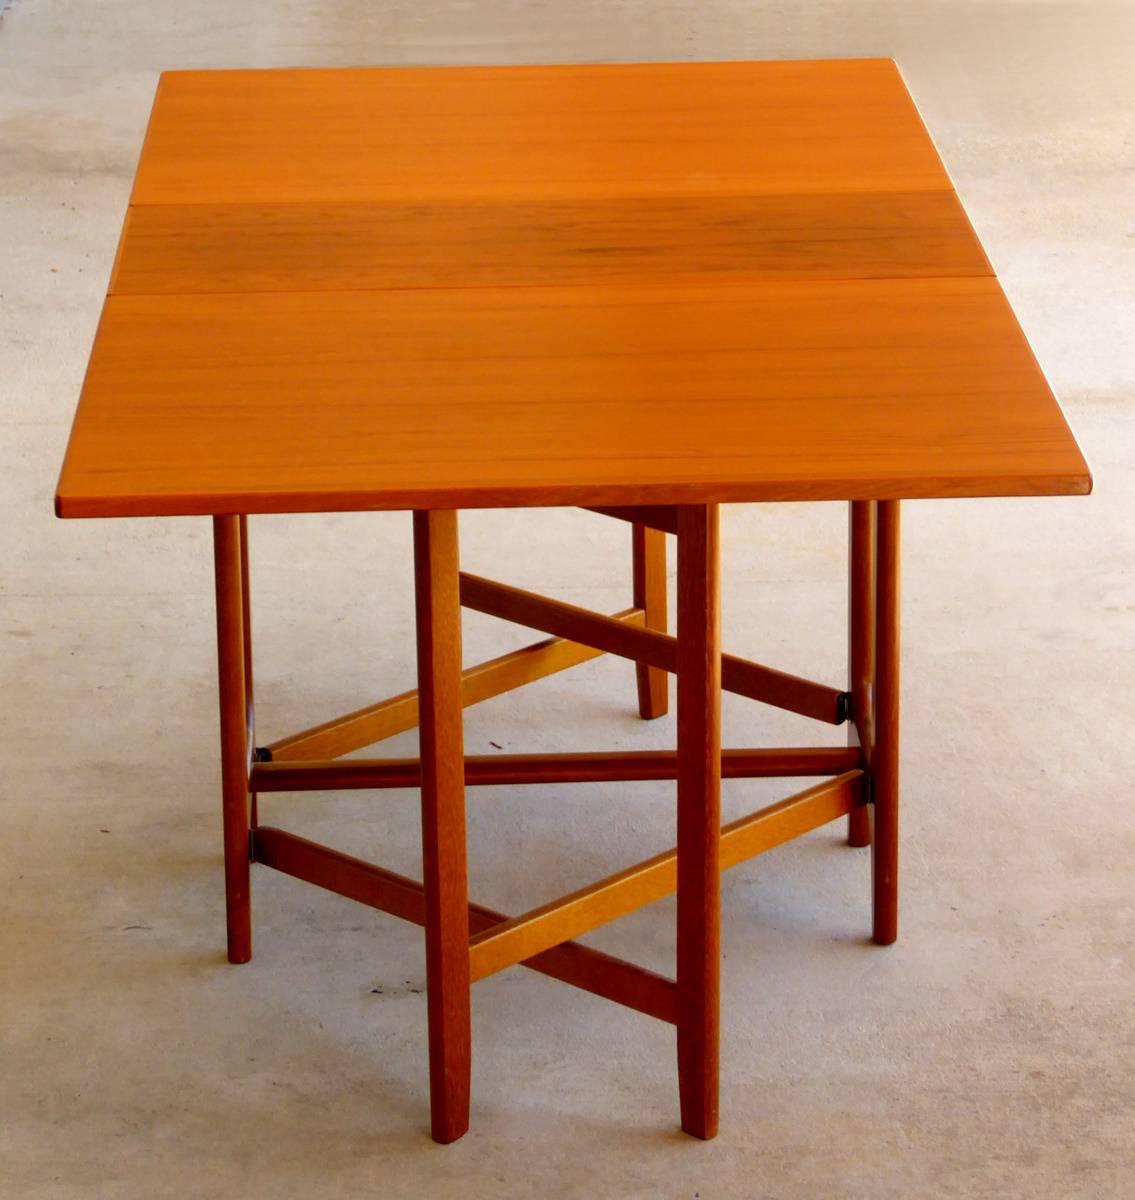 This marvelous Jacaranda drop-leaf table opens to 64 inches but takes only 13.5 inches of space. Two gatelegs per side for added stability. Designed by Bendt Winge for Kleppes Møbelfabrik and made in Norway. Exceptionally rare and